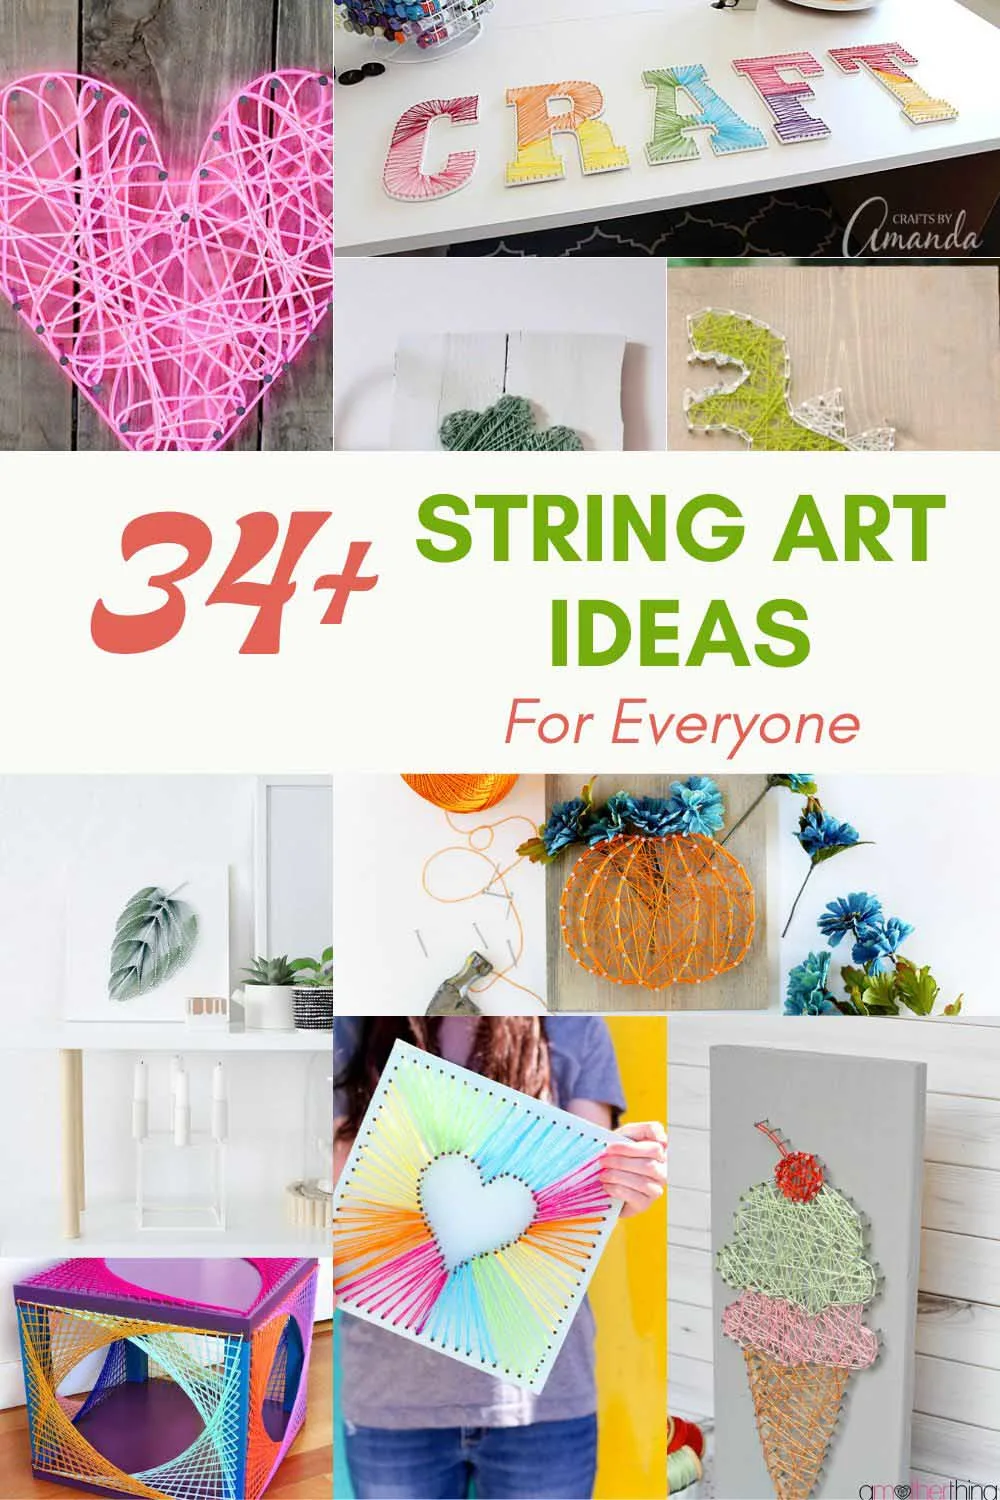 34 String Art Ideas That Charm and Delight: Creating Magic with Threads -  Pillar Box Blue